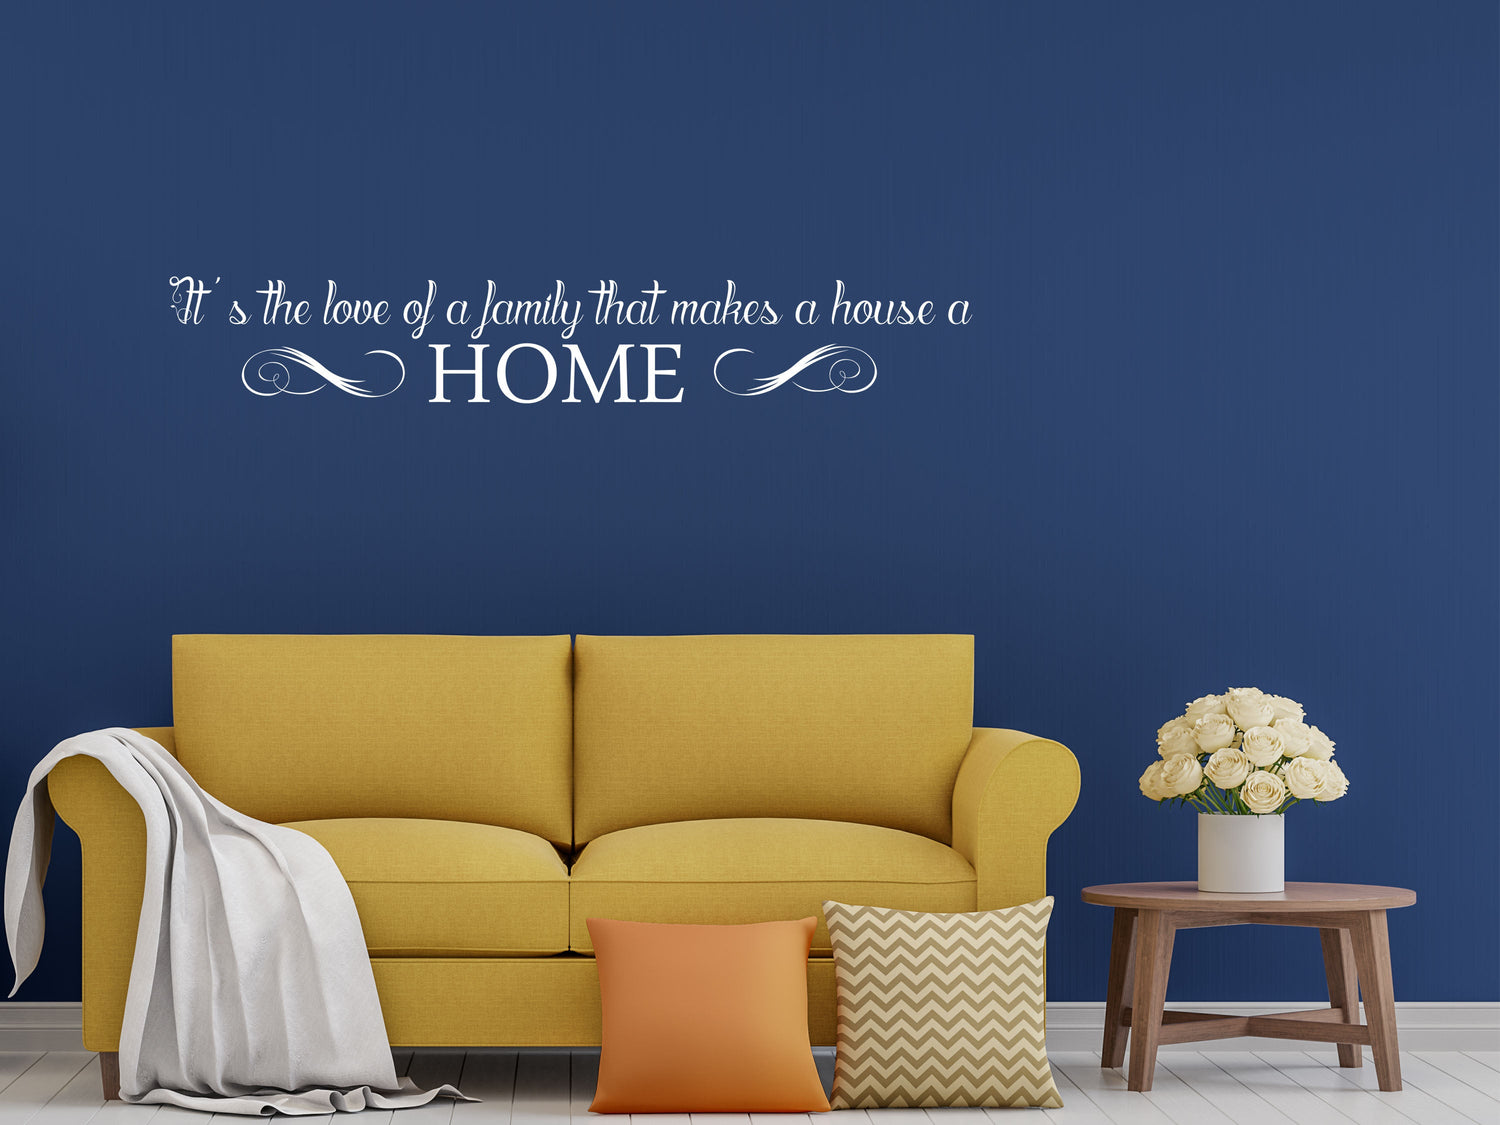 It's The Love of A Family That Makes a House a HOME Vinyl Wall Decal Inspirational Wall Signs 